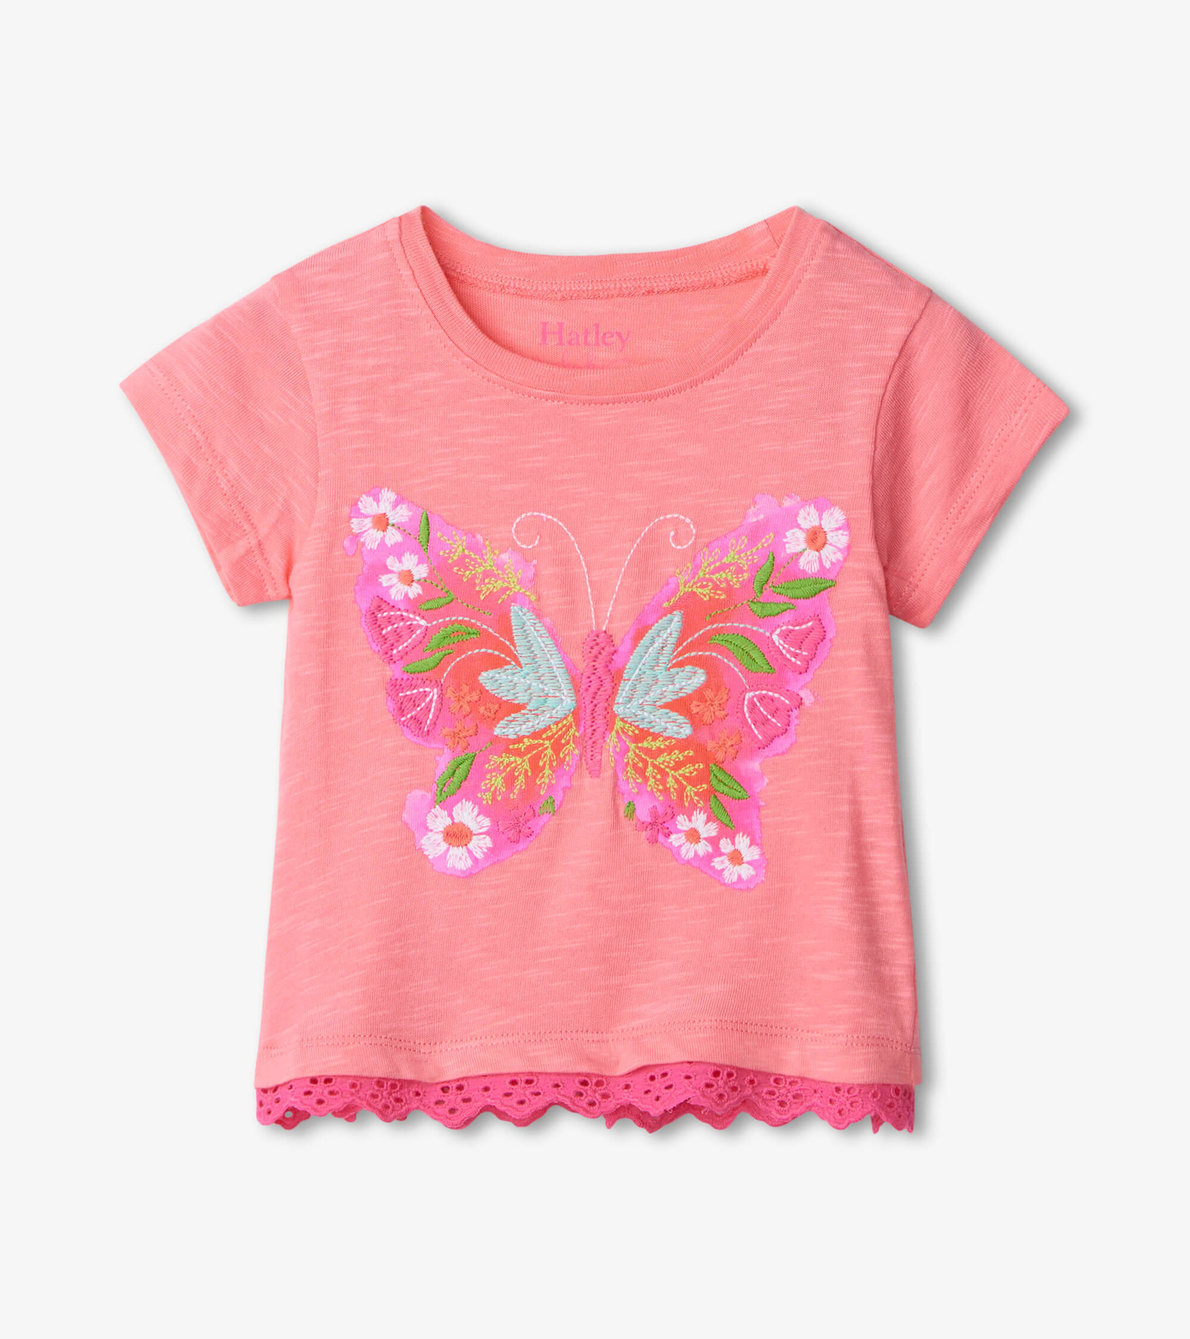 View larger image of Floral Butterfly Baby Tee